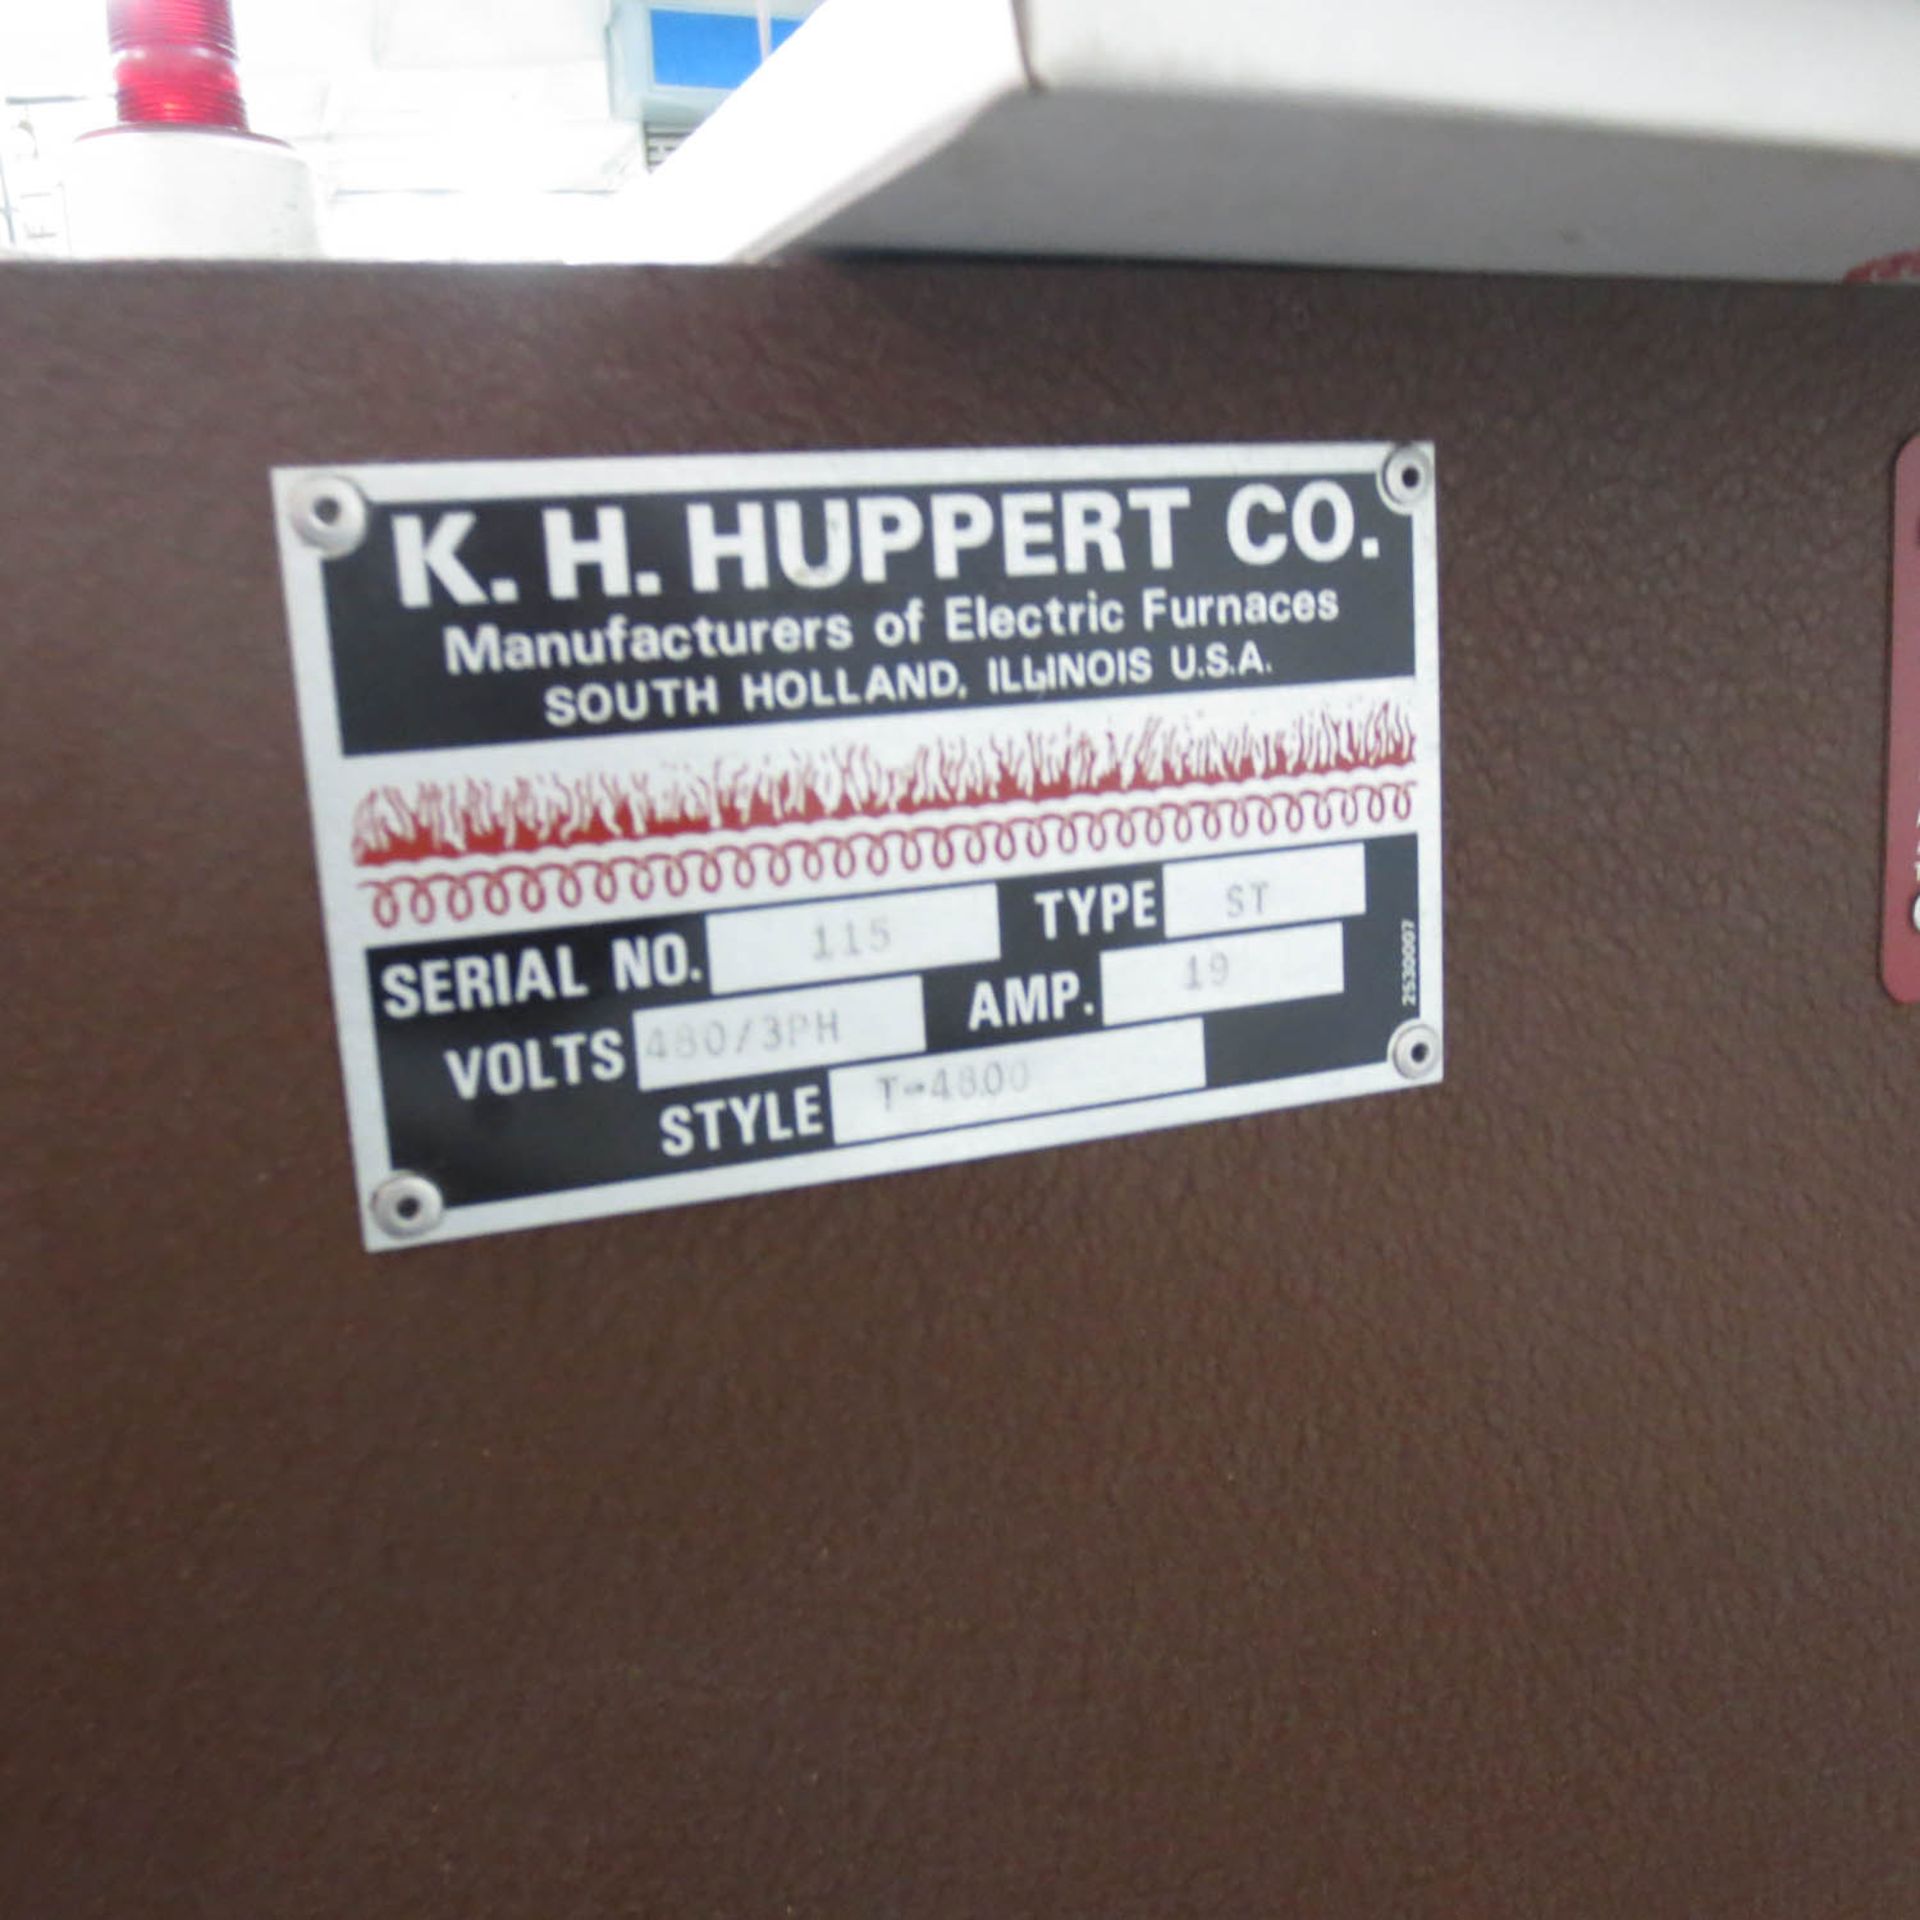 HUPP-CO T-4800 ELECTRIC FURNACE, 480 V, 3 PH, 19 AMPS, ST TYPE, S/N:115 - Image 2 of 2